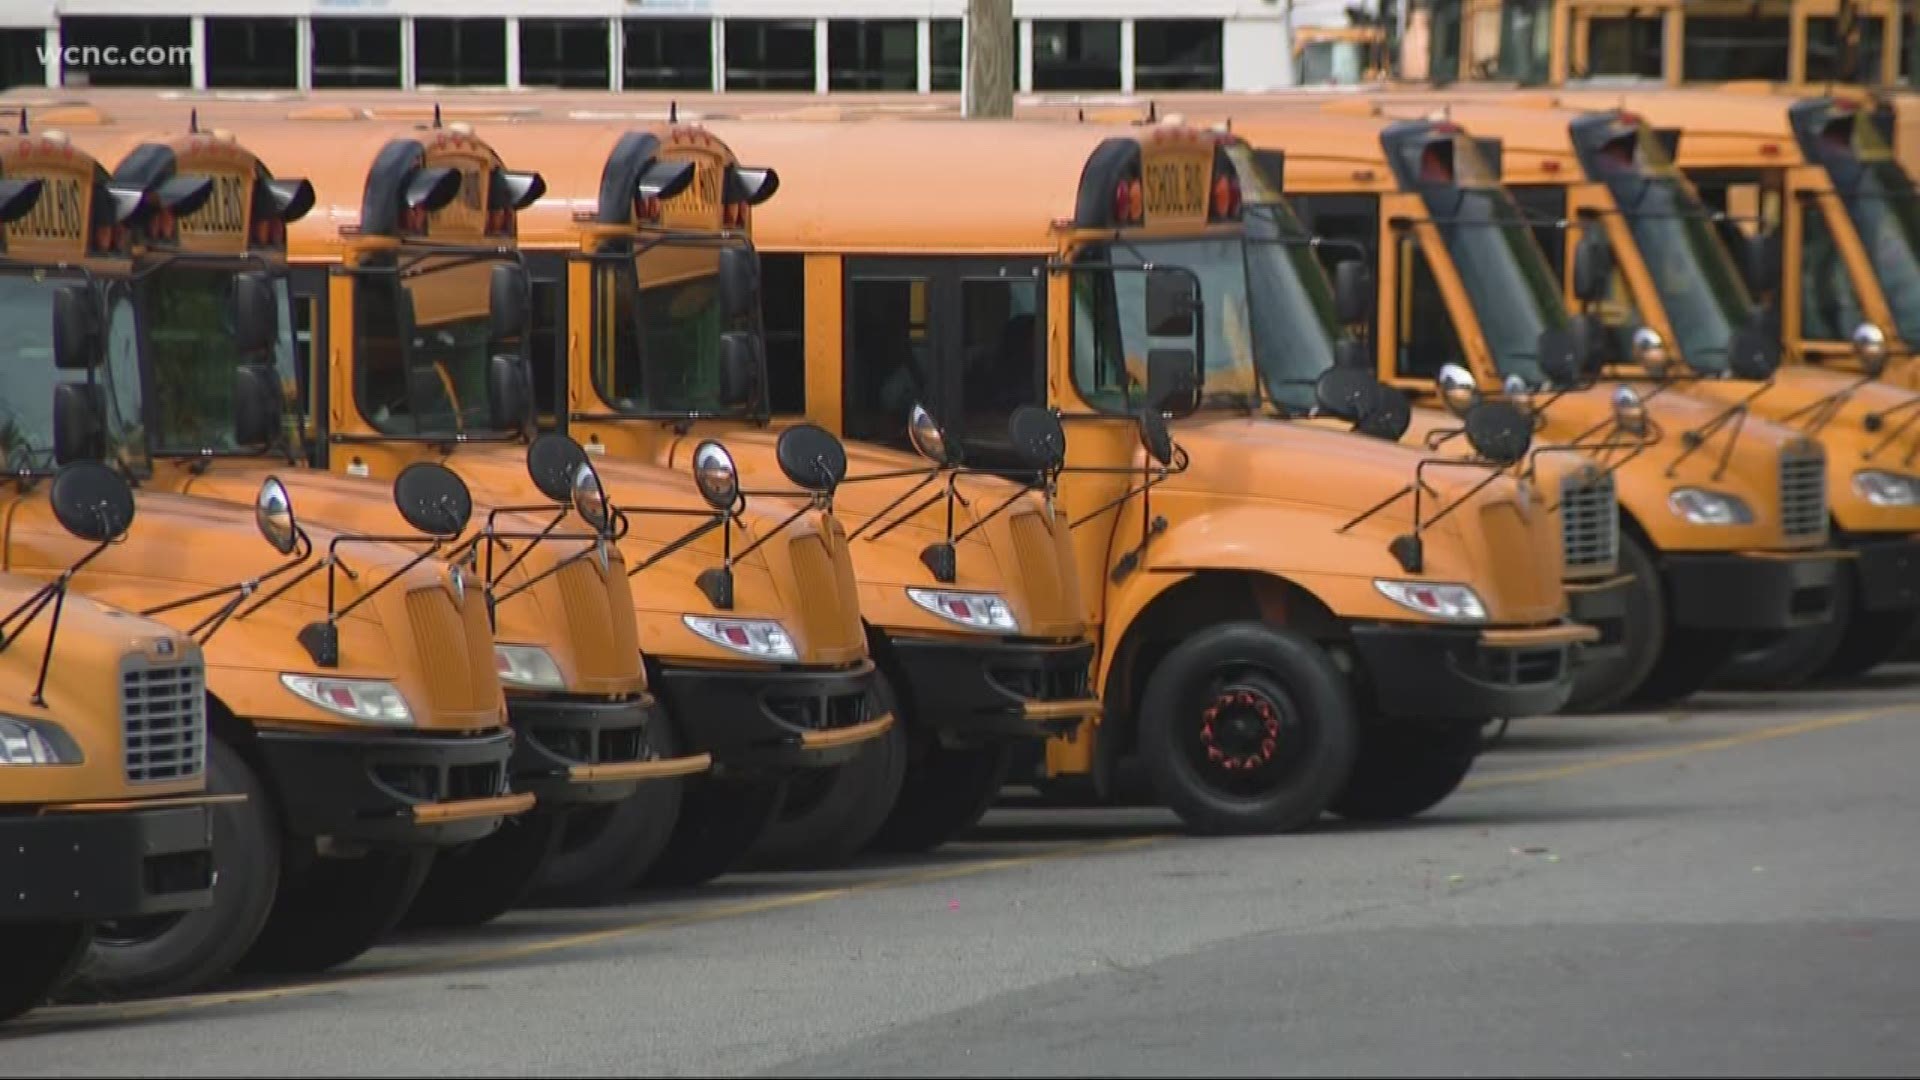 CMS now has more propane buses than any other district in the state. The district is short drivers, but officials say that's changing.